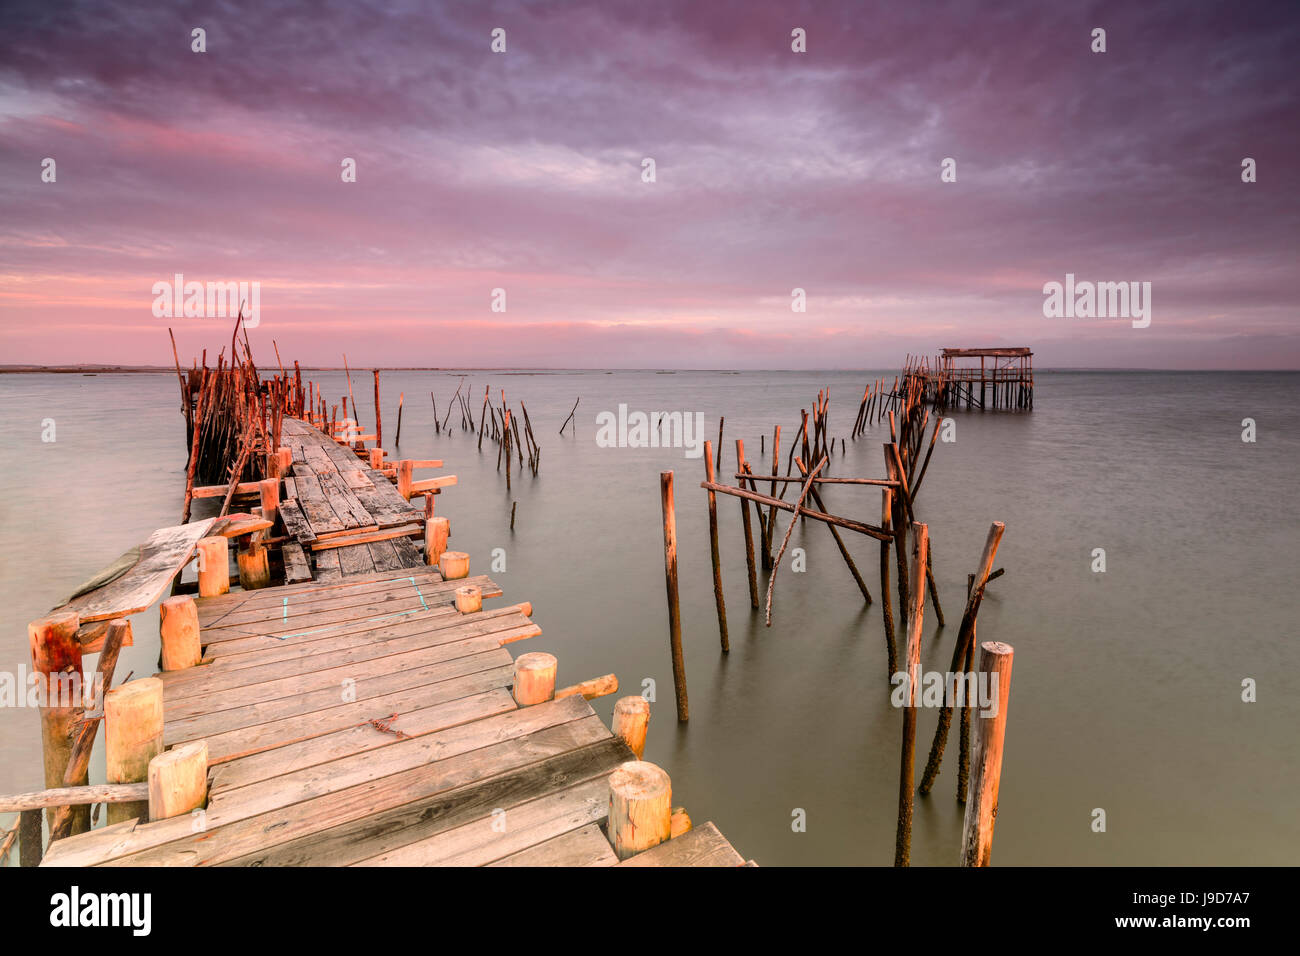 Pink sky at dawn on the Palafito Pier in the Carrasqueira Natural Reserve of Sado River, Alcacer do Sal, Setubal, Portugal Stock Photo